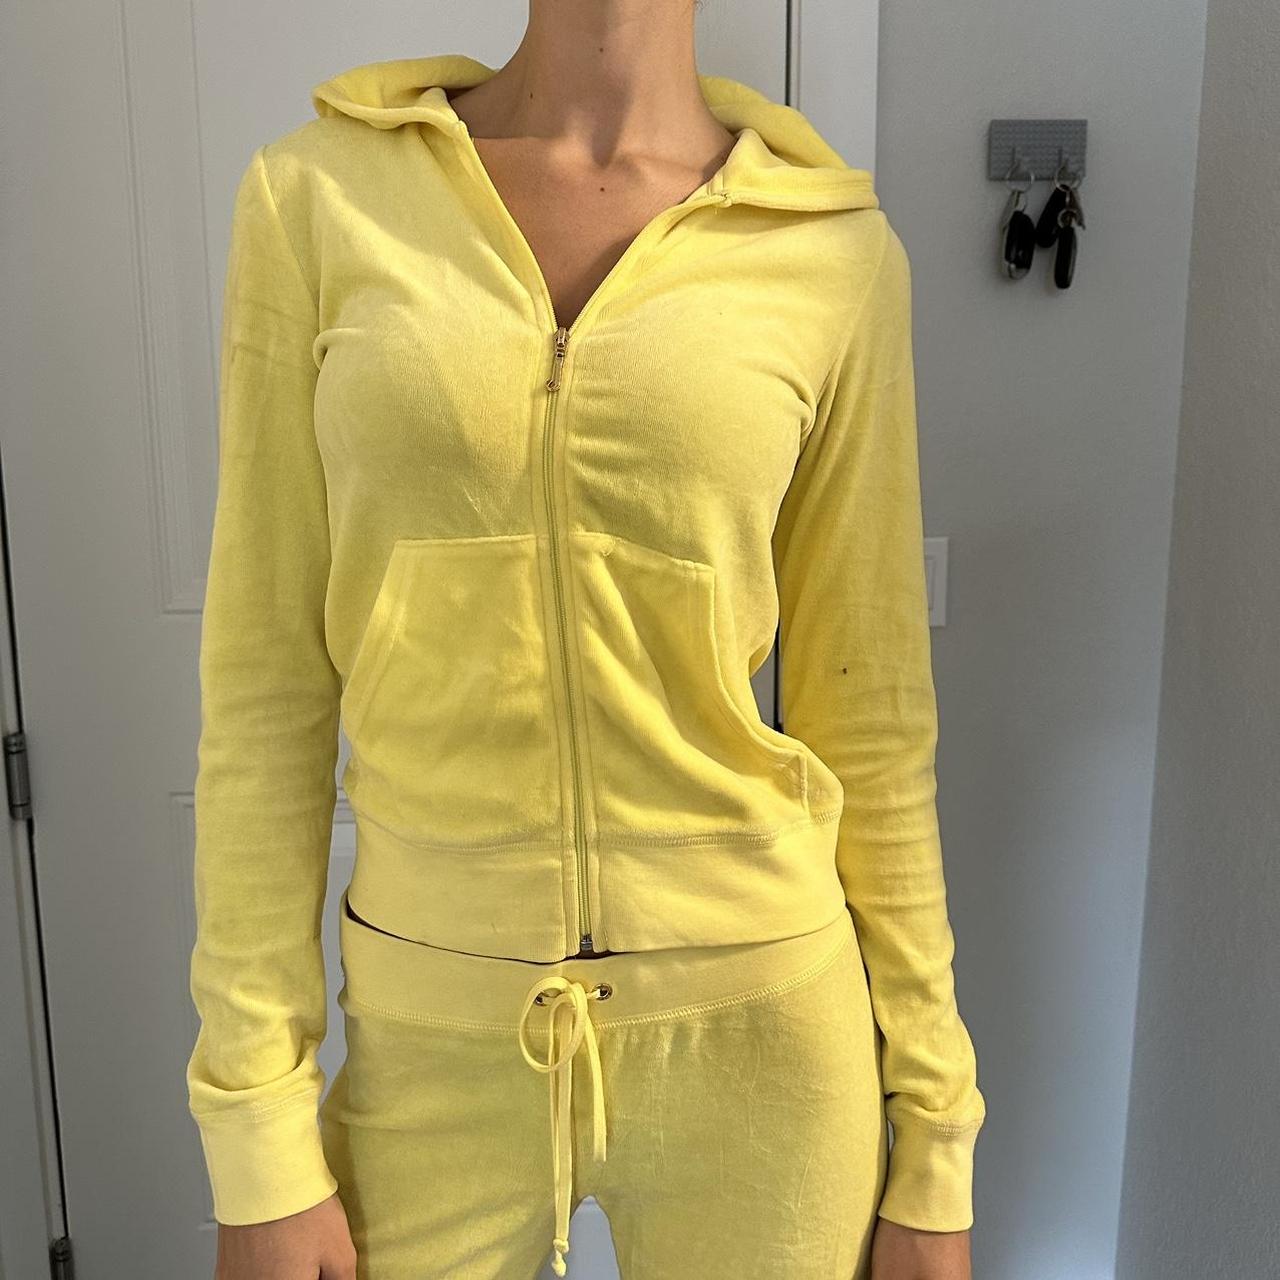 Yellow Juicy couture velvet tracksuit Says “Fun is... - Depop